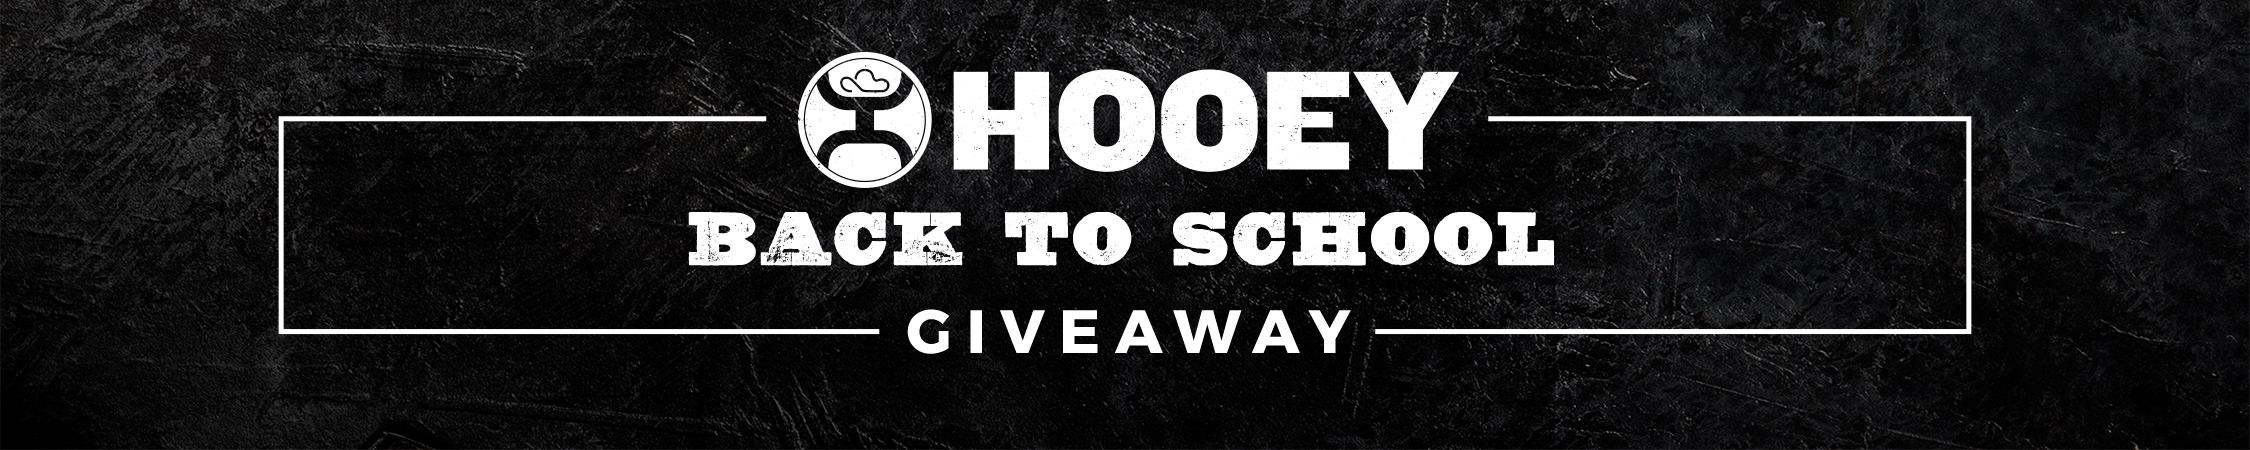 Enter the Hooey Back To School Giveaway August 1 - 14, 2022